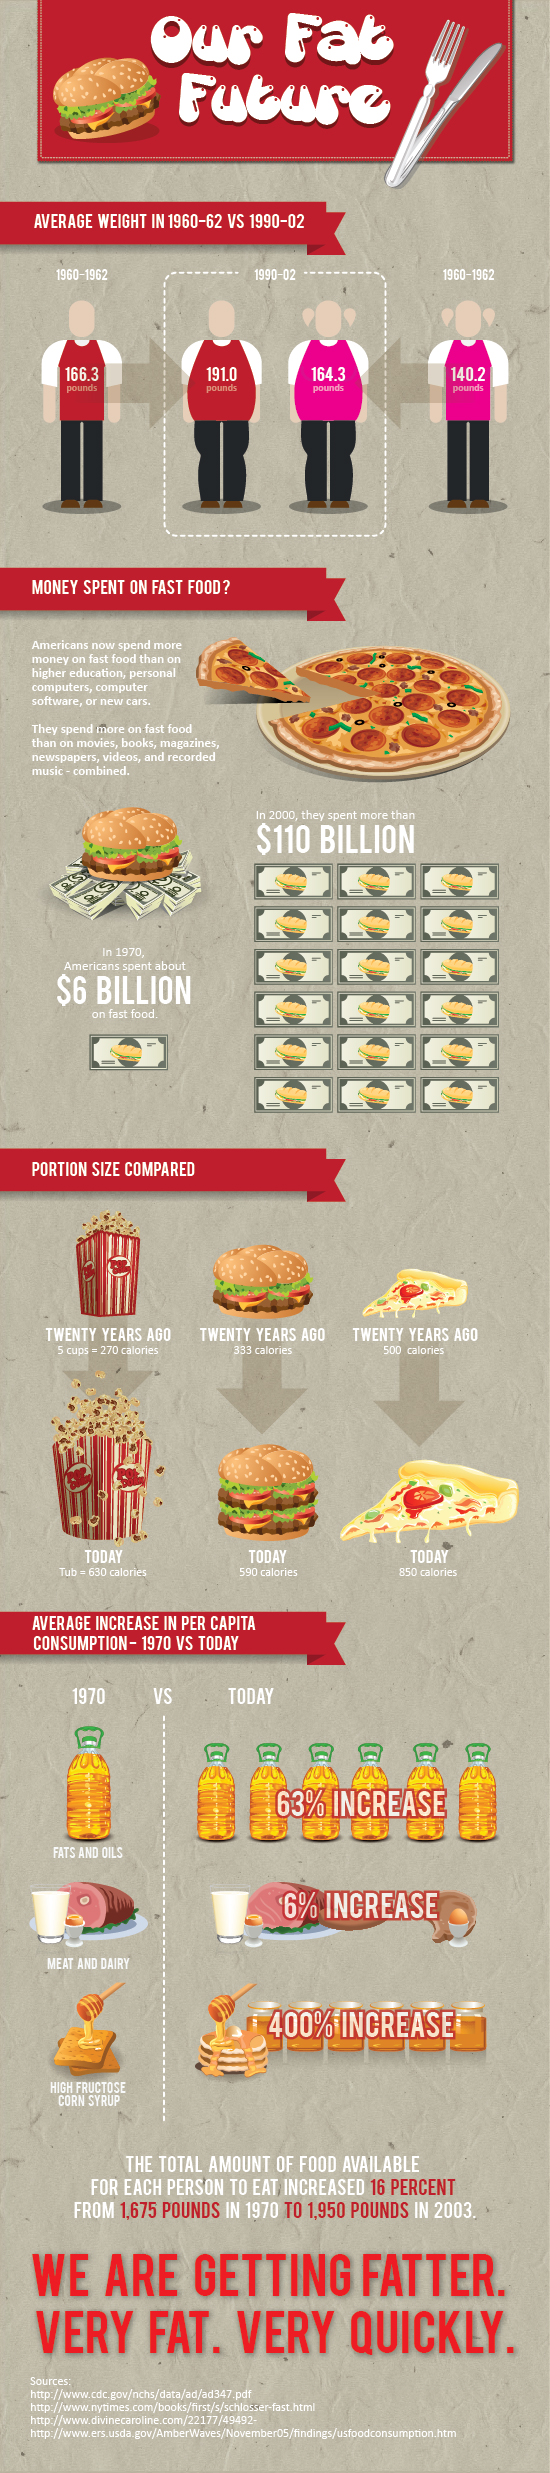 Why Are Americans Getting Fatter? [Infographic]